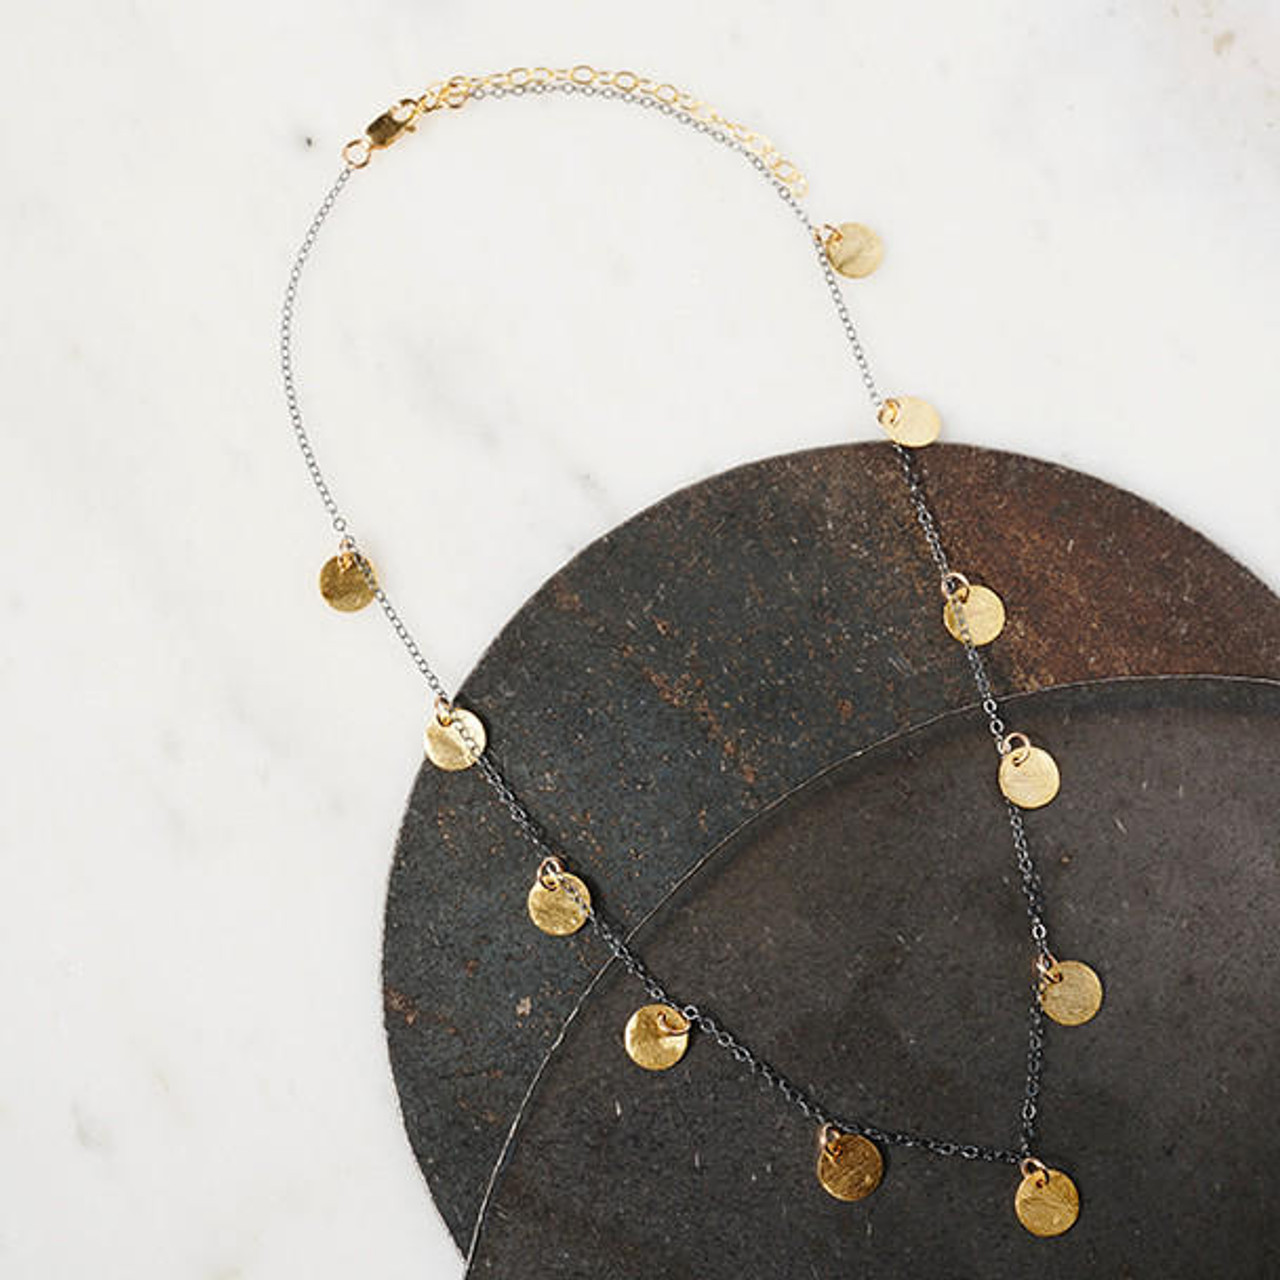 Gold Charms on Oxidized Chain Necklace by Susan Rifkin